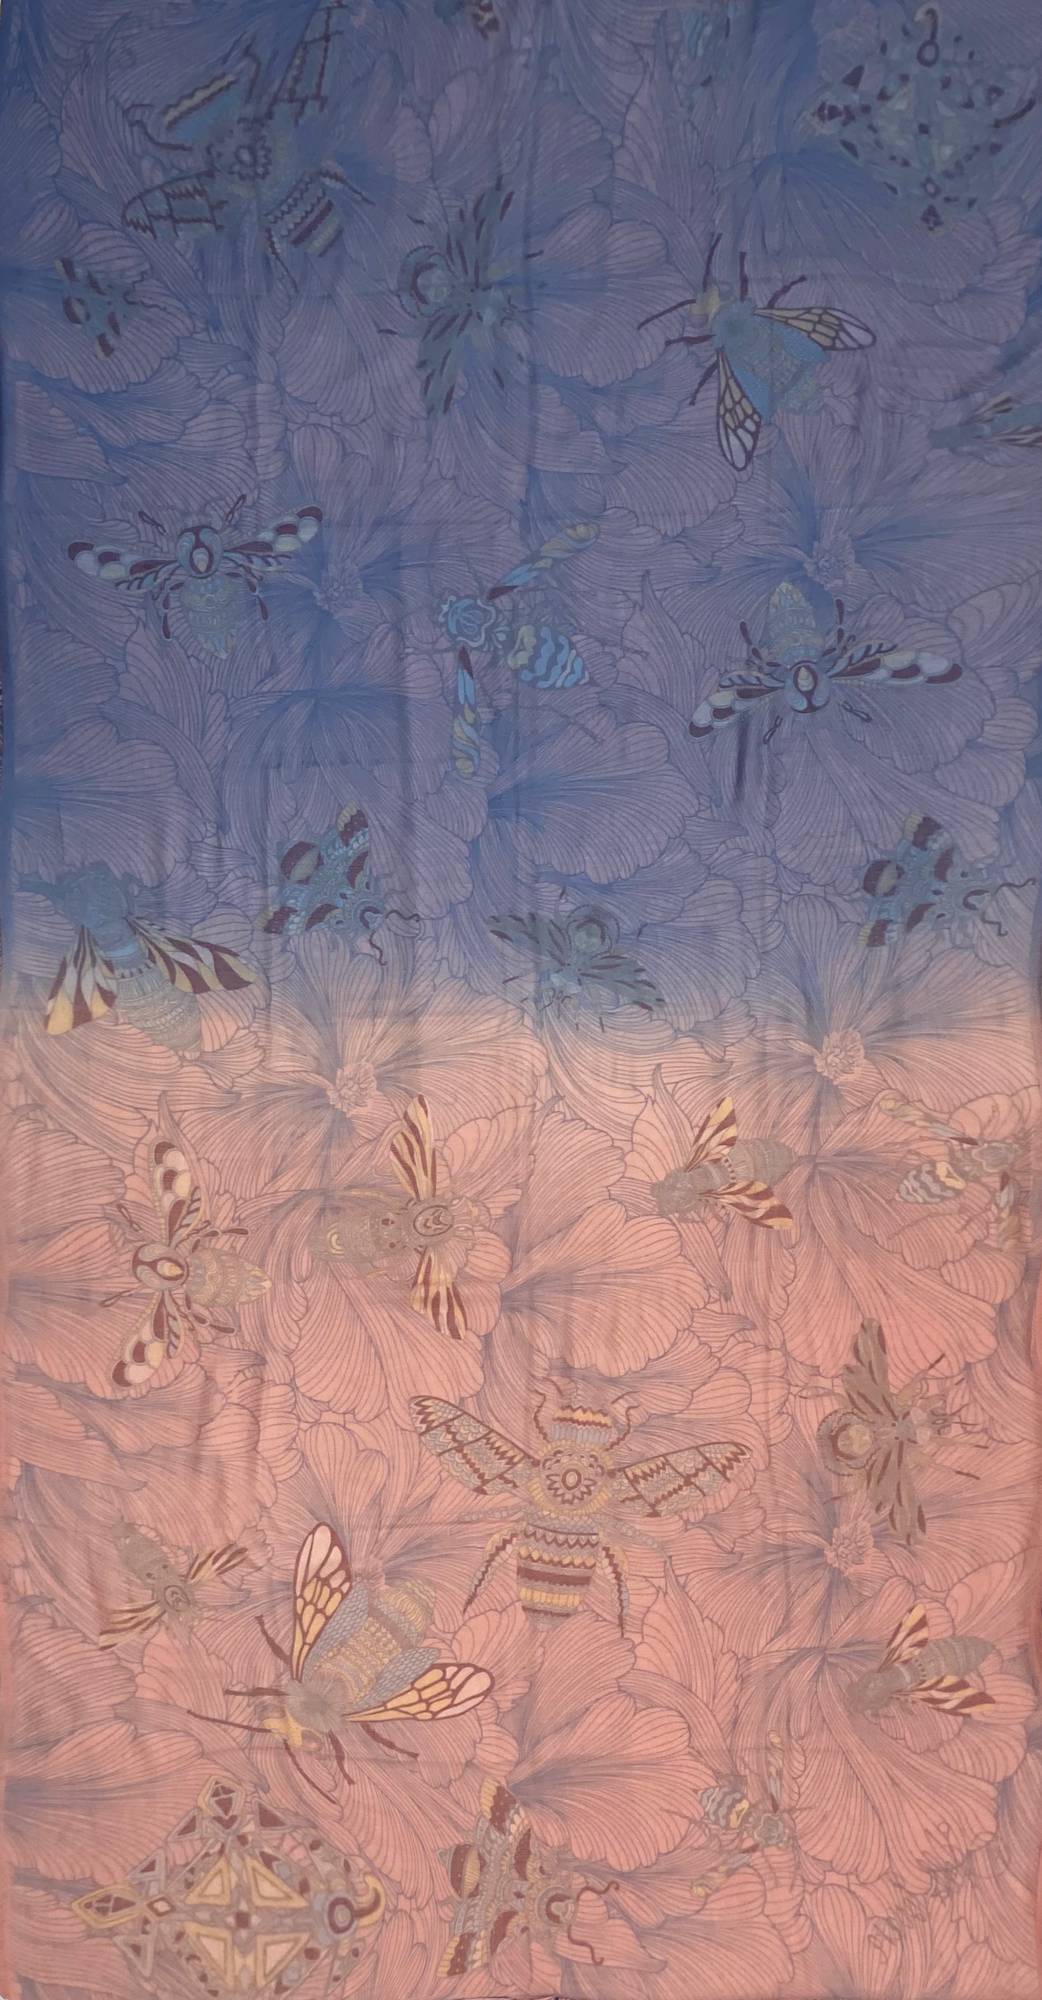 Scarf two-layer, doubleface printed on silk motif "JUST BEES" 100x200 back 100% cashmere color gradient pink-blue